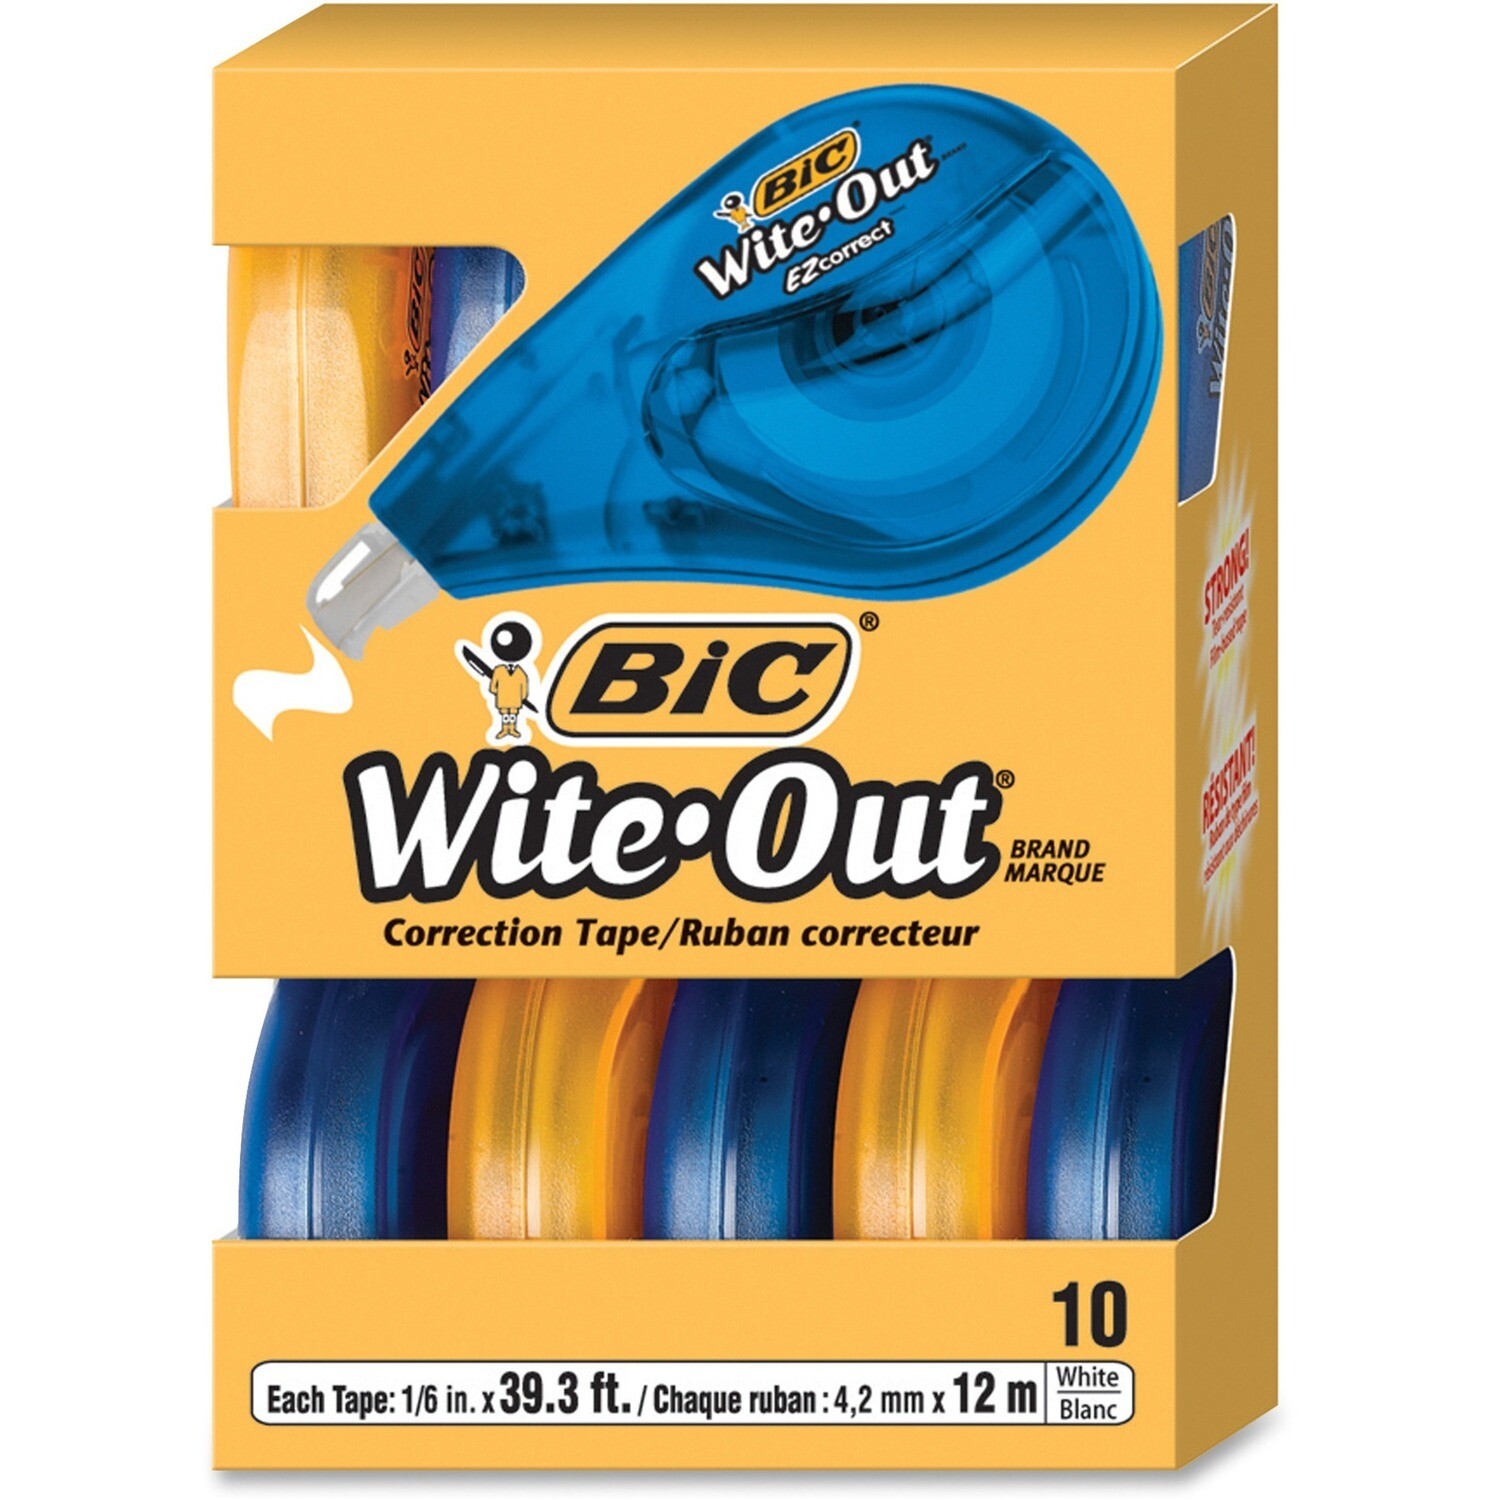 Correction Tape, Wite-Out, Bic 10 Pack, 4.2 Mm x 12 M